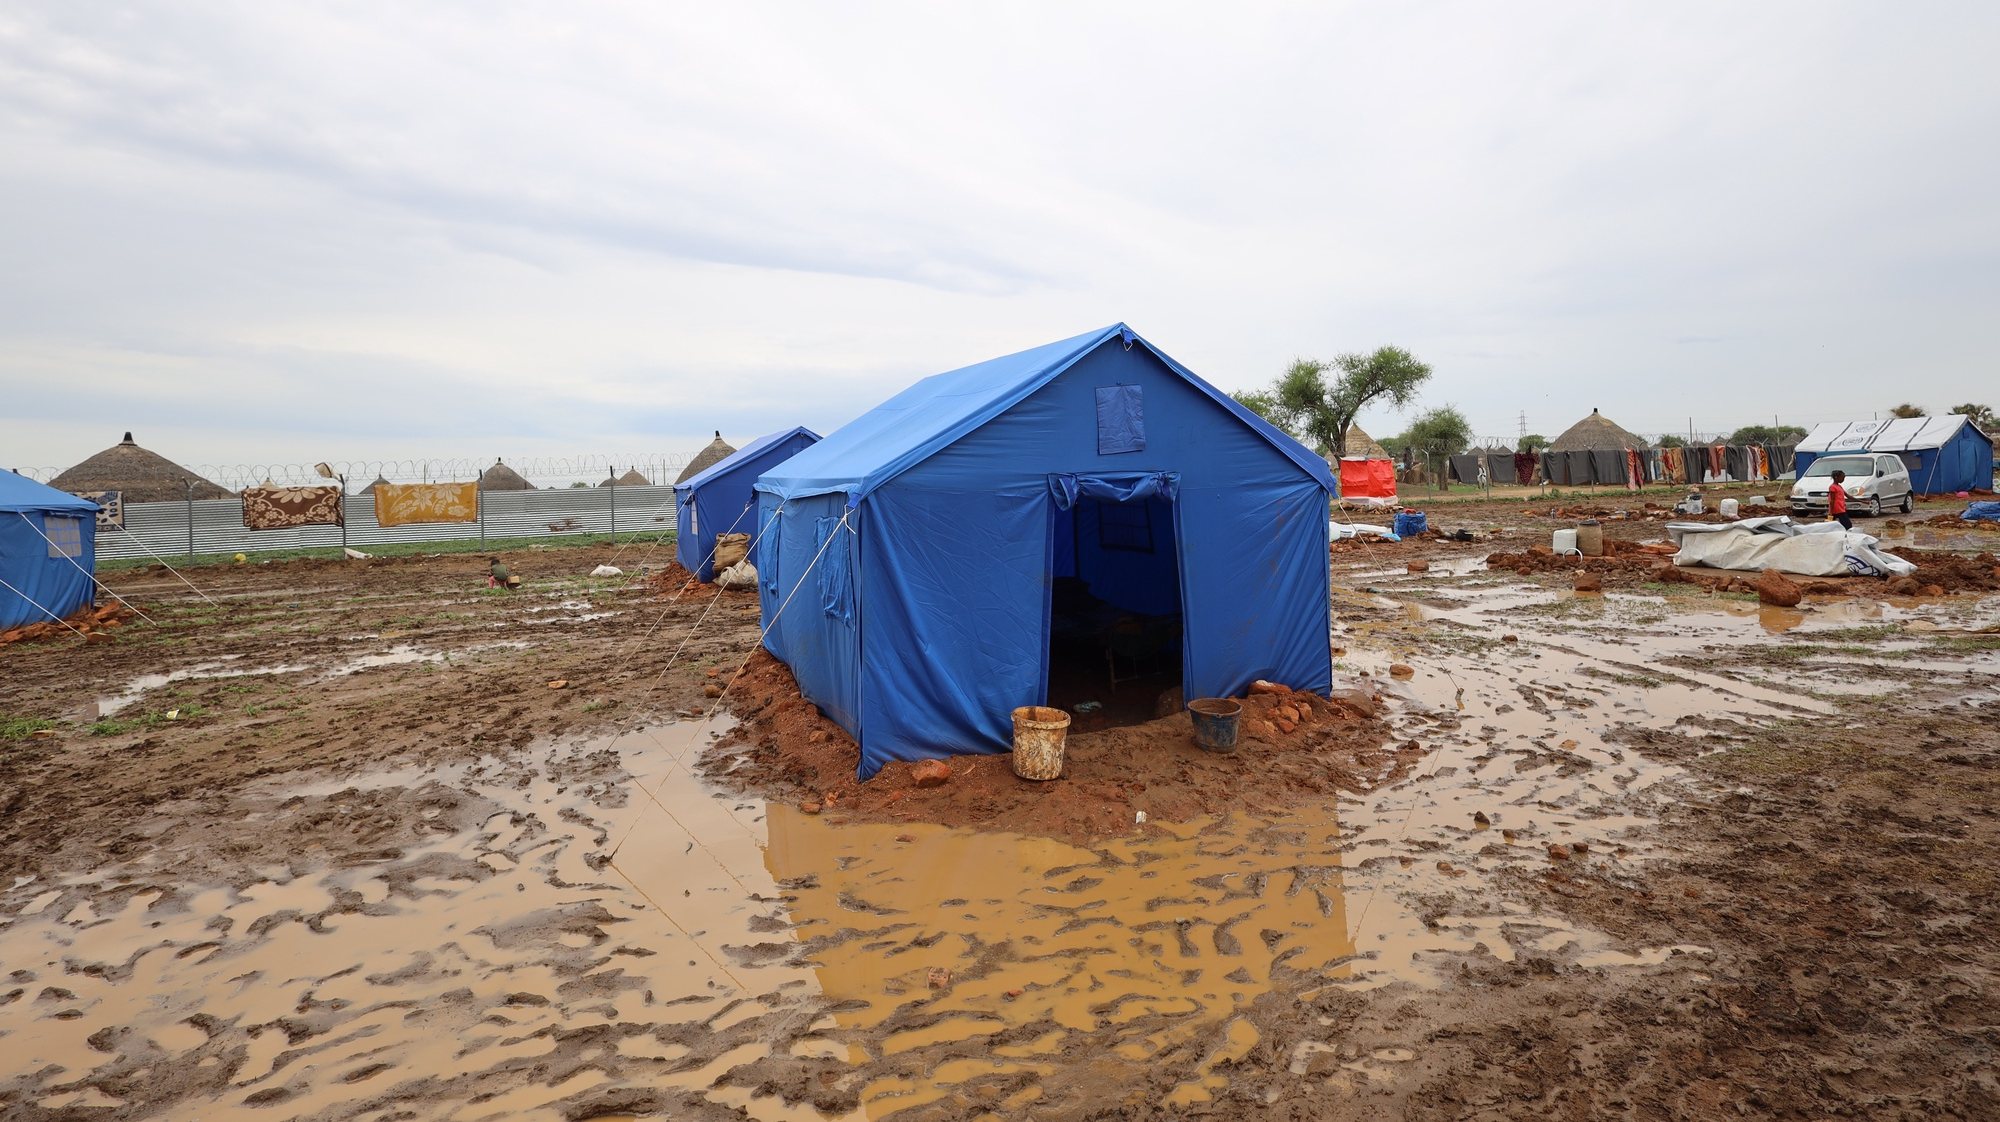 epa11494680 Tents at a camp for people displaced due to fighting in Sinja town of Sennar State, established at Al-Huri, Gedaref city, eastern Sudan, 24 July 2024. According to UN Office for the Coordination of Humanitarian Affairs (OCHA), over 136,000 people fled Sennar since 24 June 2024 due to conflict between the Sudanese Armed Forces (SAF) and the Rapid Support Forces (RSF). US Secretary of State Antony Blinken said in a statement on 23 July 2024 that the US has invited the two fighting sides in Sudan to participate in ceasefire talks co-hosted by Switzerland and Saudi Arabia on 14 August &#039;to reach a nationwide cessation of violence, enabling humanitarian access to all those in need&#039;. The leader of Sudanese RSF Mohamed Hamdan Daglo on 24 July announced on his X (formerly Twitter) account the participation in the US-mediated ceasefire talks in Switzerland, expressing support for reaching &#039;a peaceful, negotiated political solution that restores the country to civilian rule and the path of democratic transition&#039;. According to the International Organization for Migration (IOM) figures, 10,594,576 individuals are internally displaced in Sudan, including 7,794,480 individuals displaced since the outbreak of armed conflict between the SAF and RSF on 15 April 2023.  EPA/STR